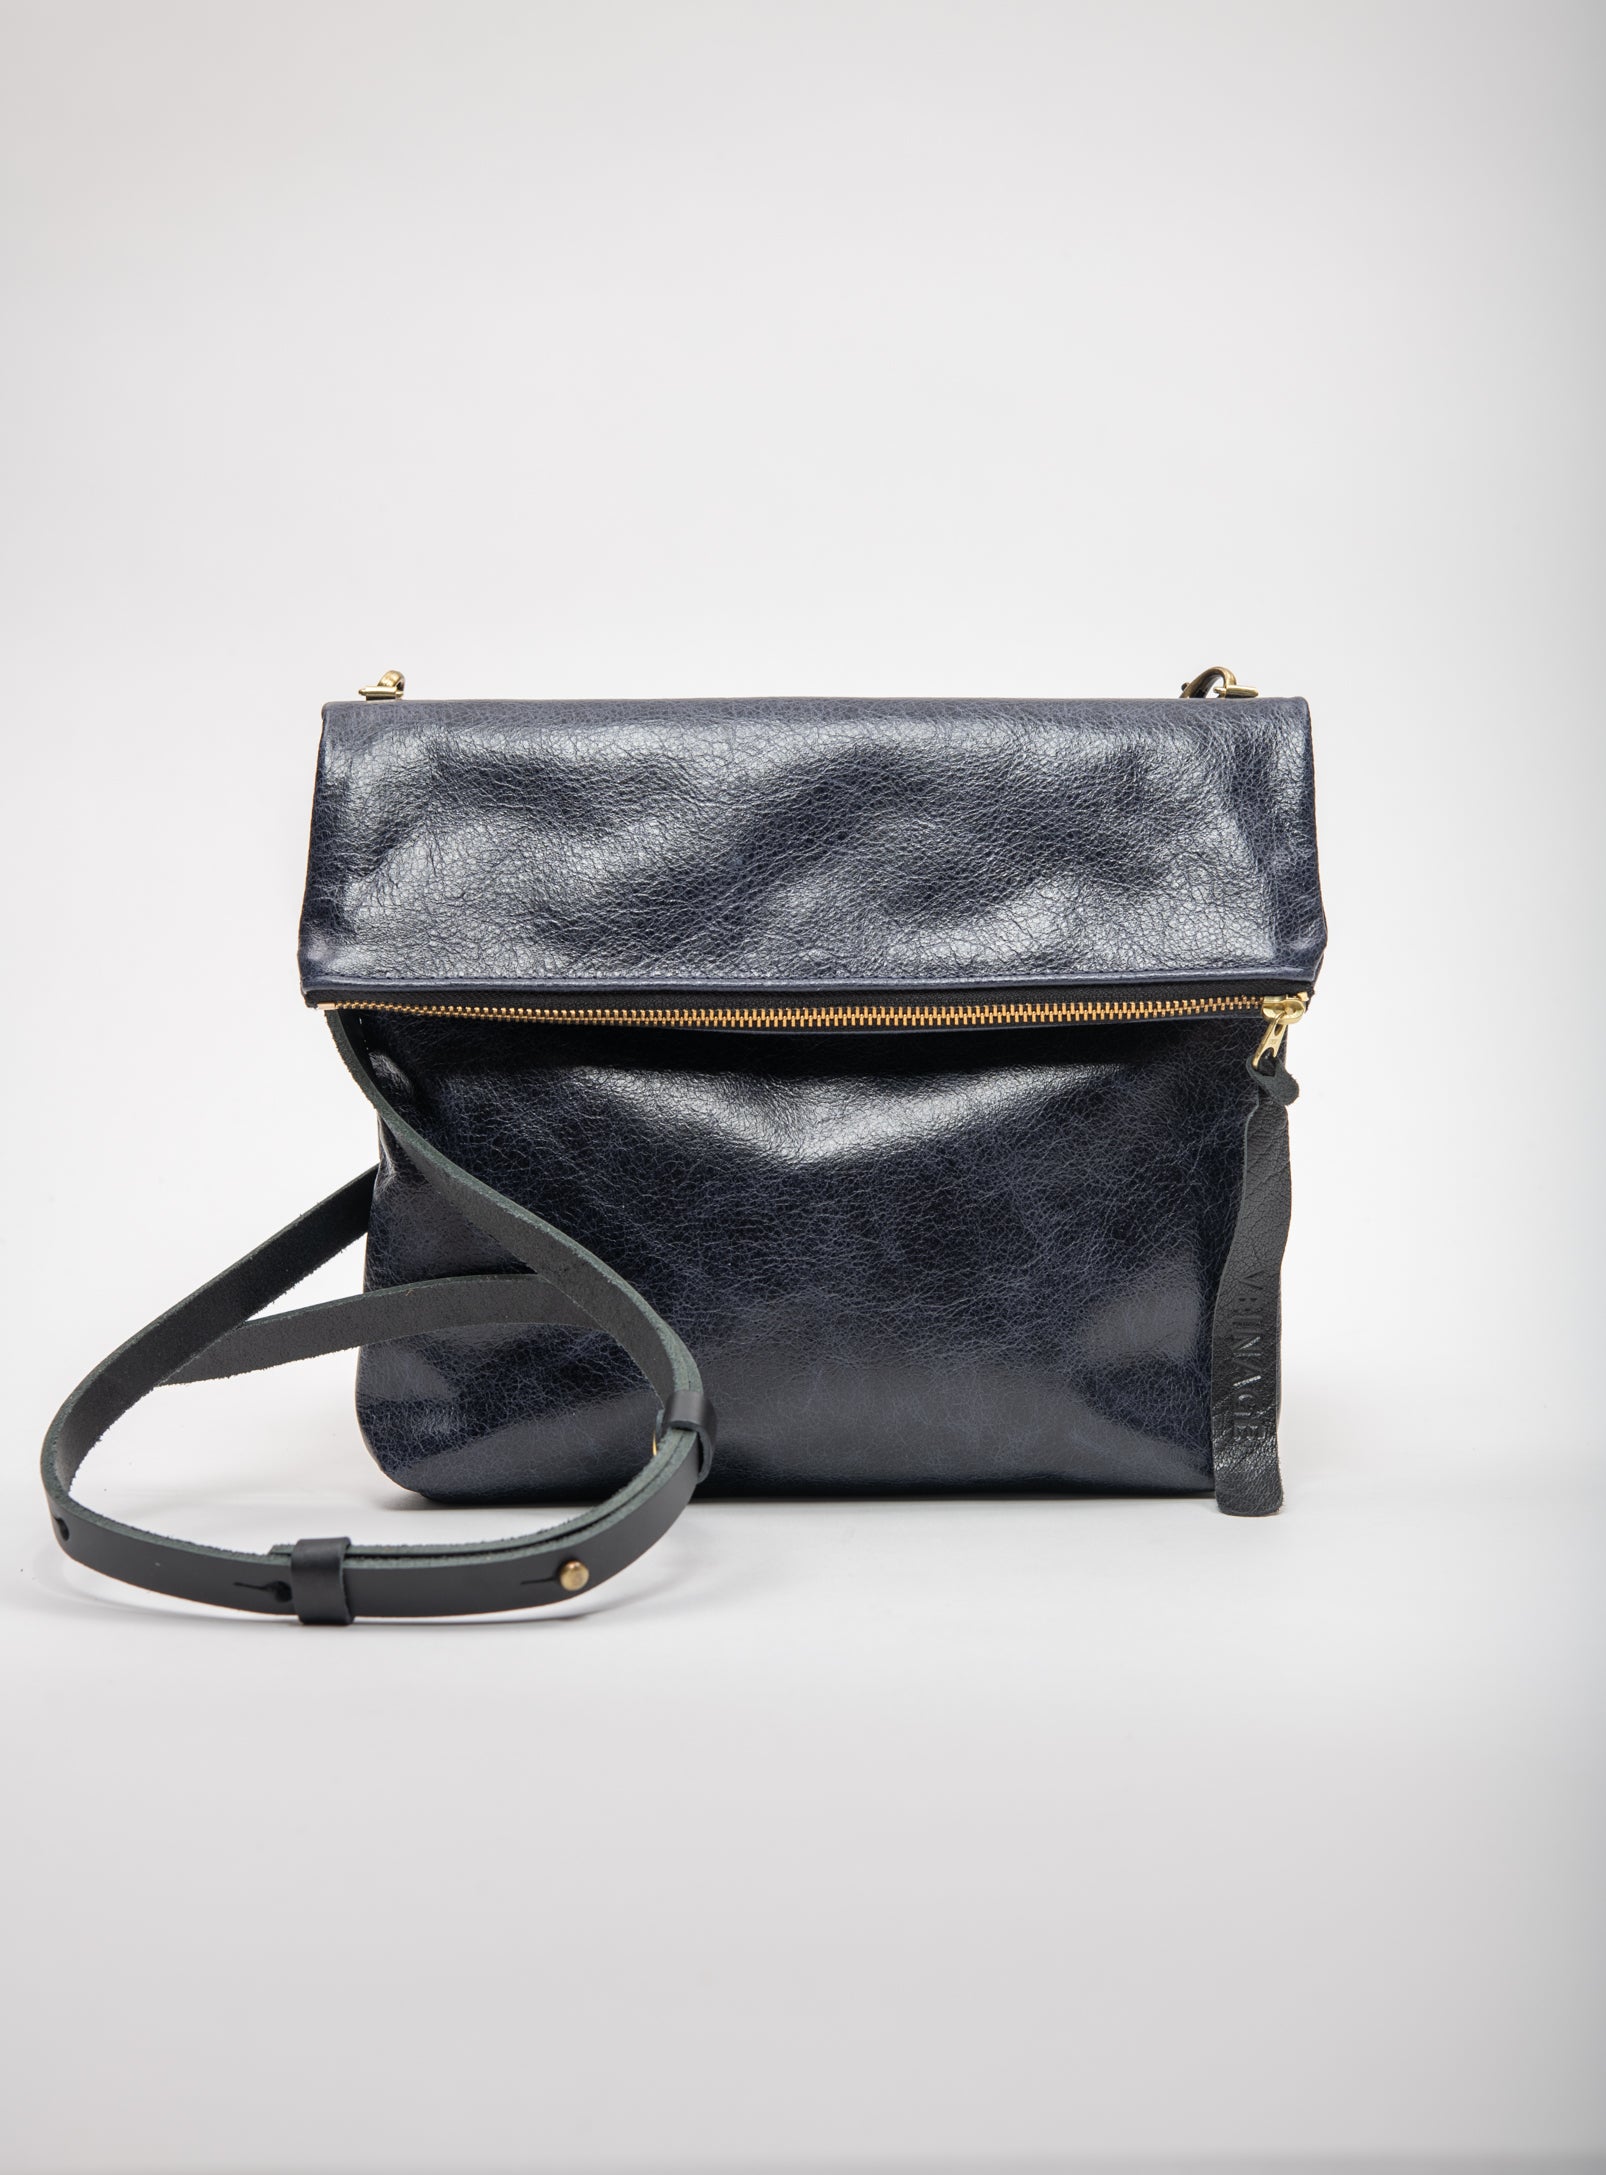 Veinage Bordeaux black leather clutch bag with crossbody strap, handmade in Montreal with upcycled materials